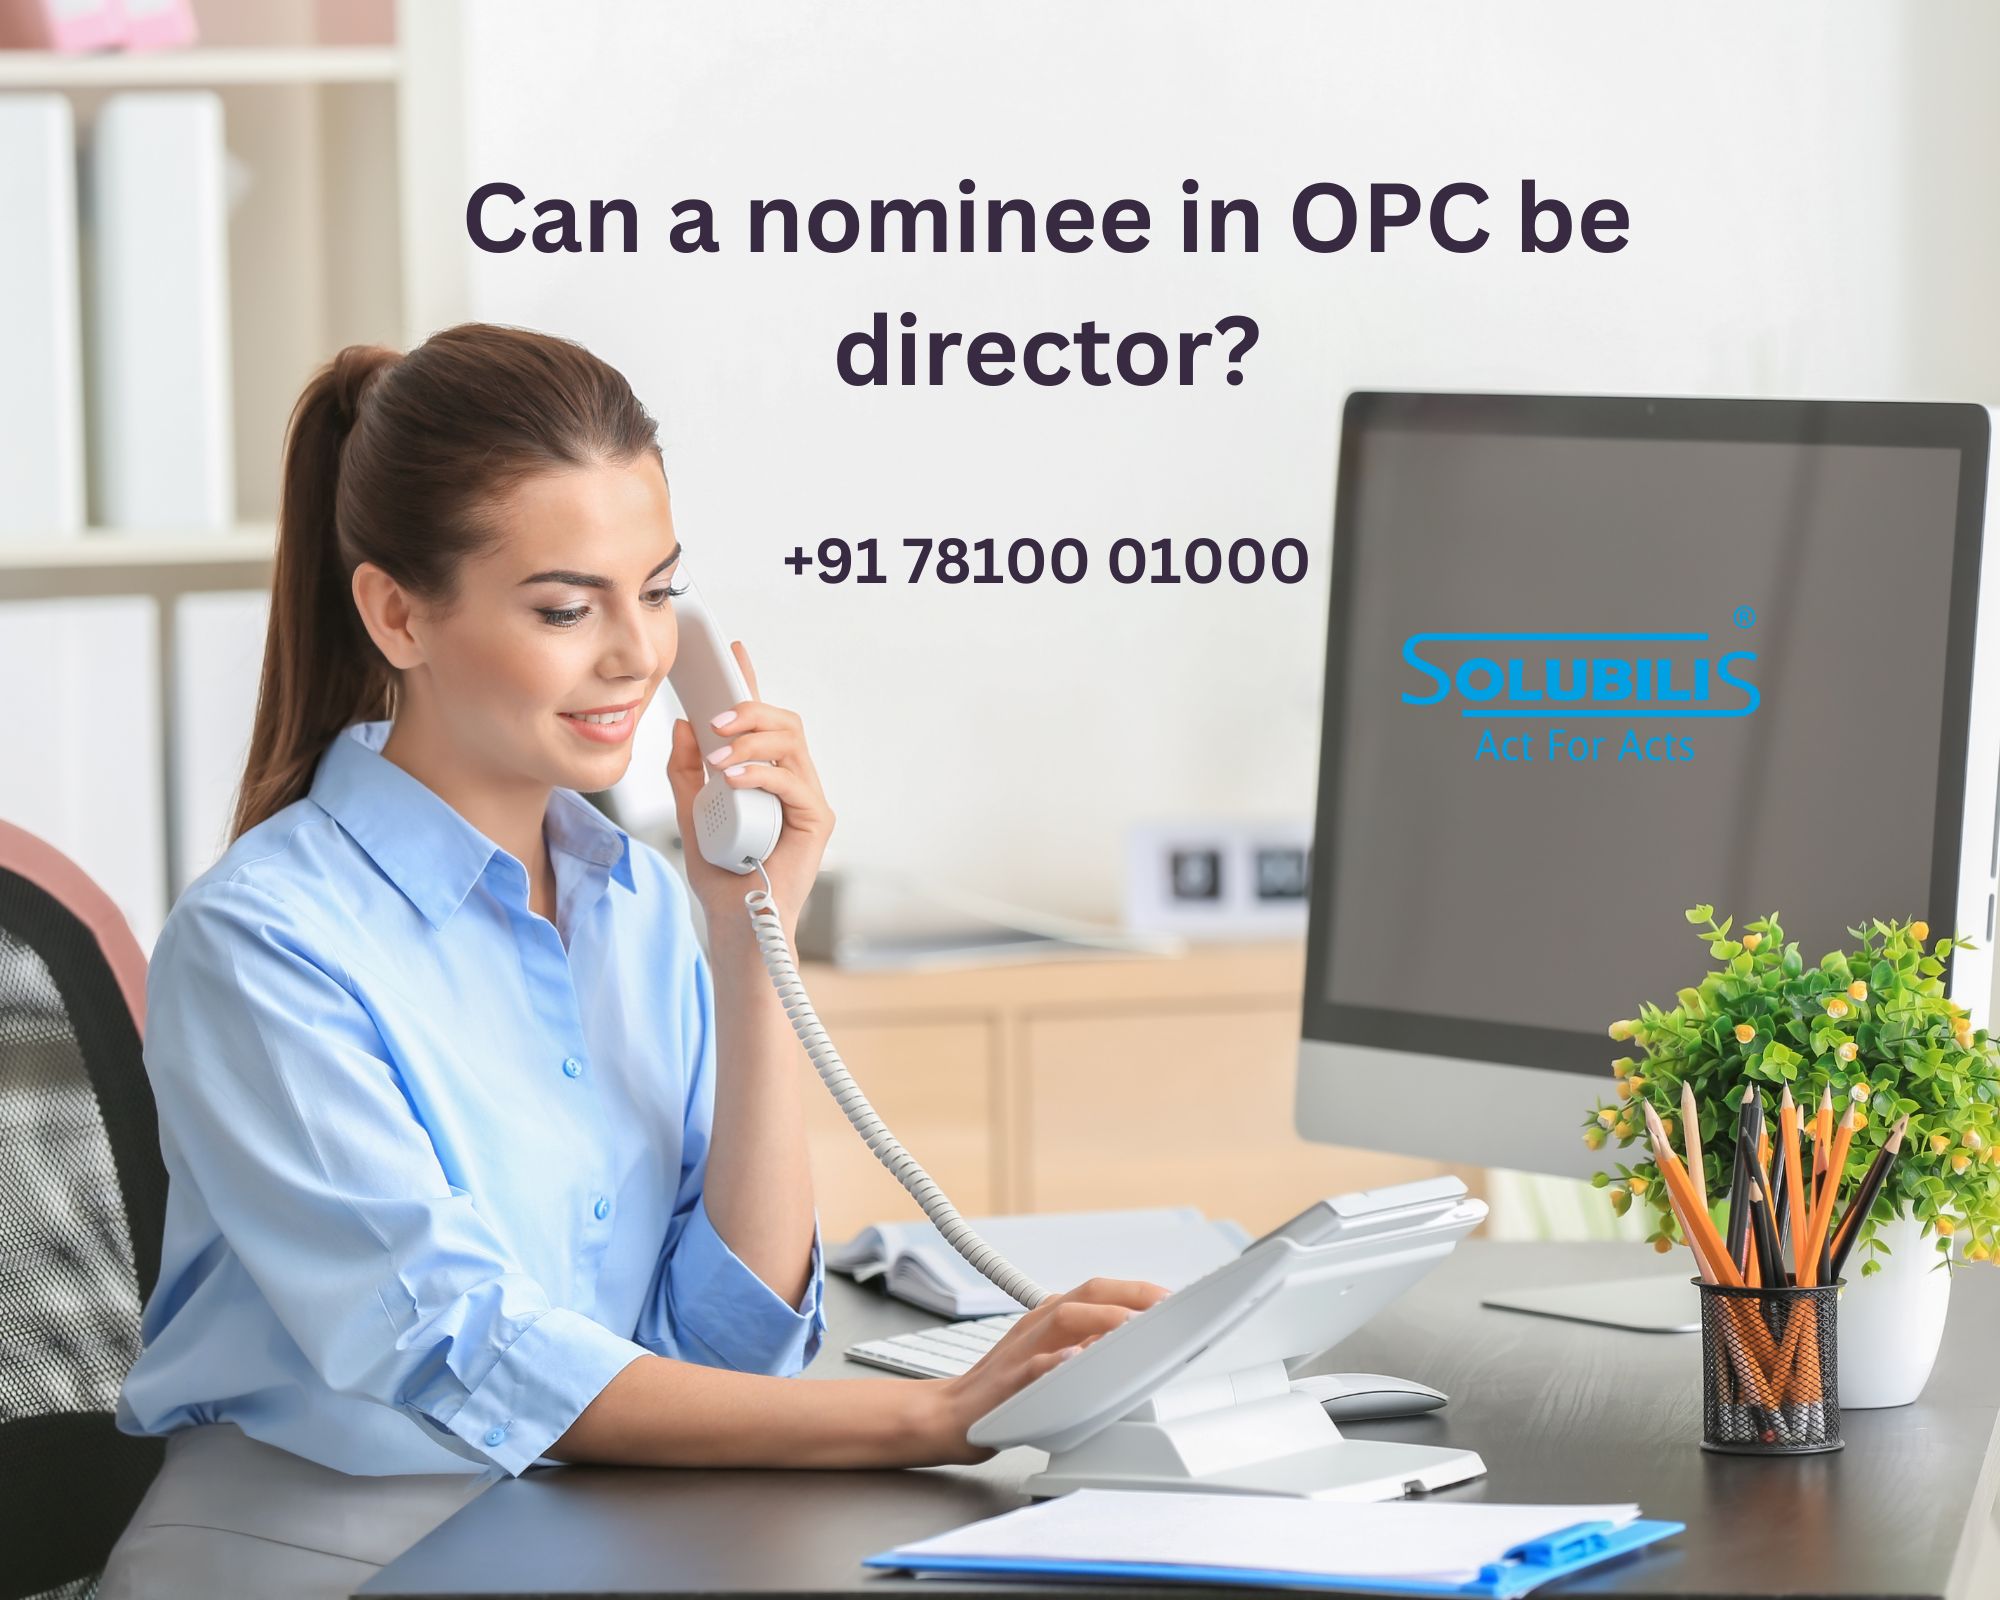 Can a nominee in OPC be director